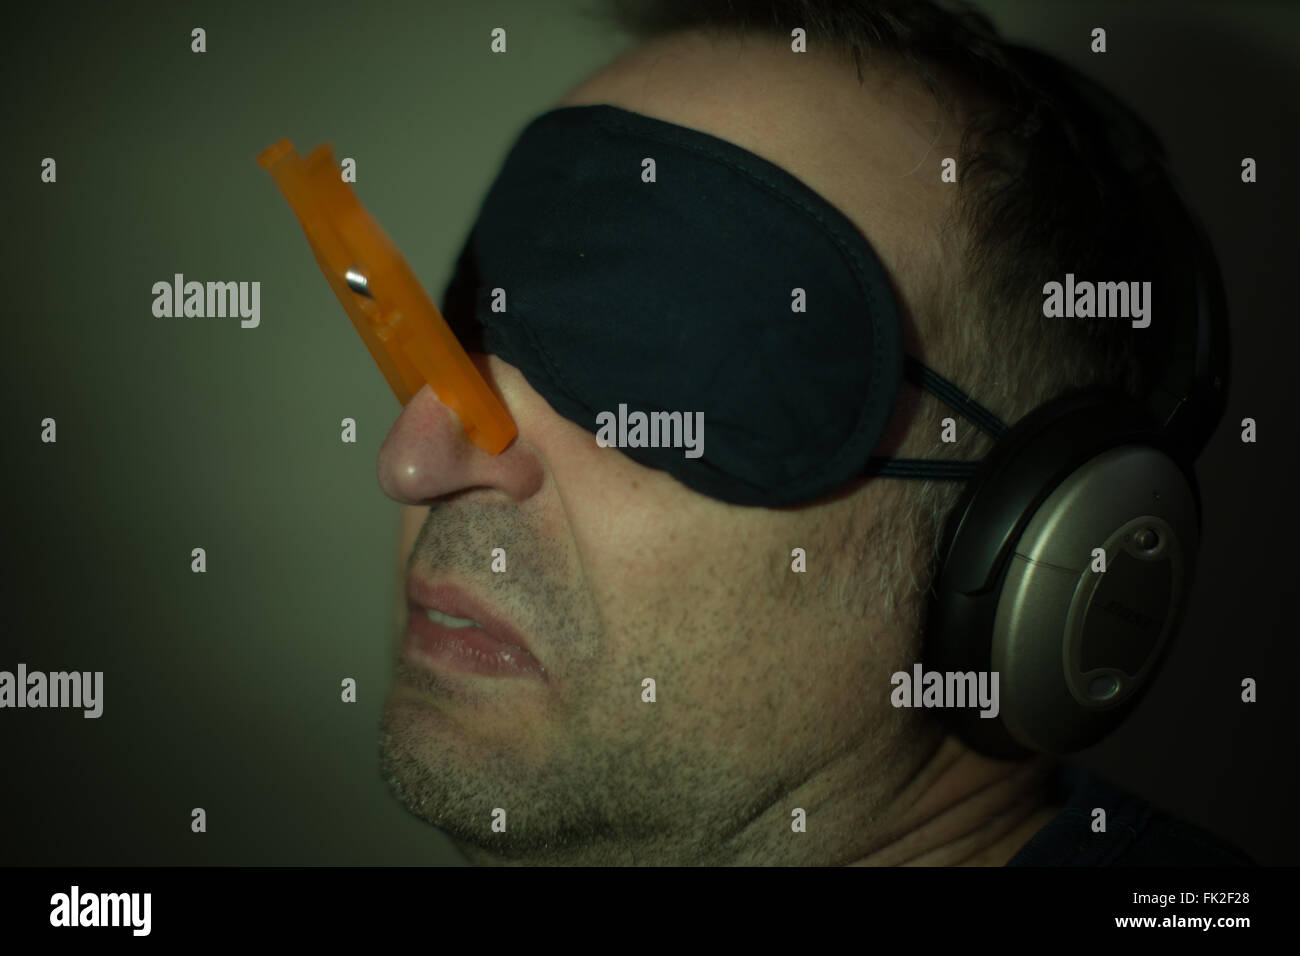 A man wears a clothes peg on his nose, headphones and an eye mask Stock  Photo - Alamy